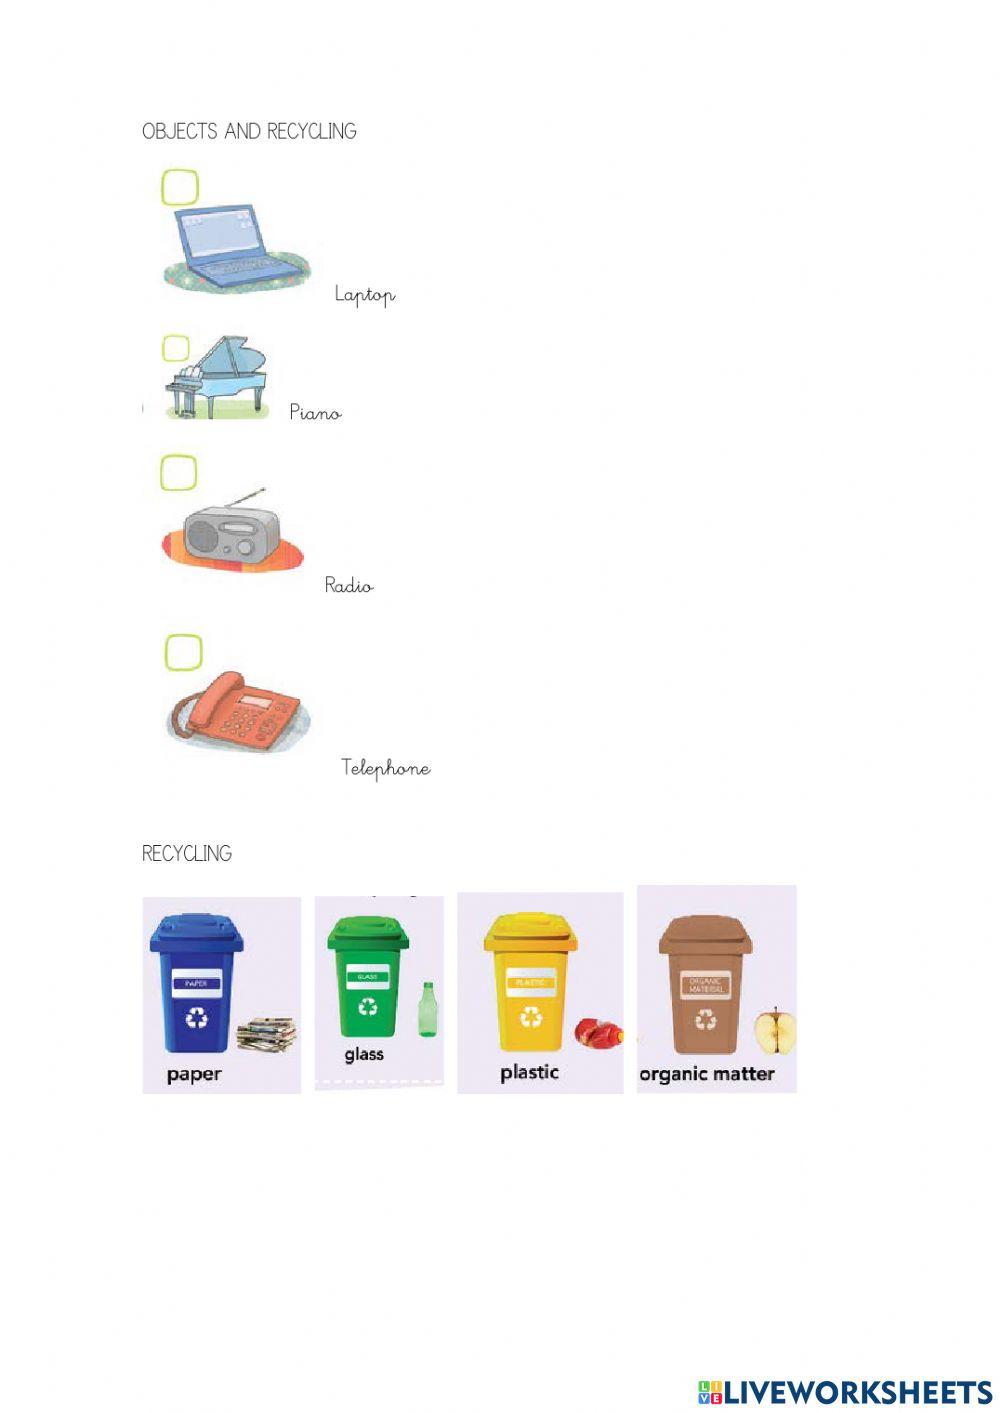 Objects and recycling